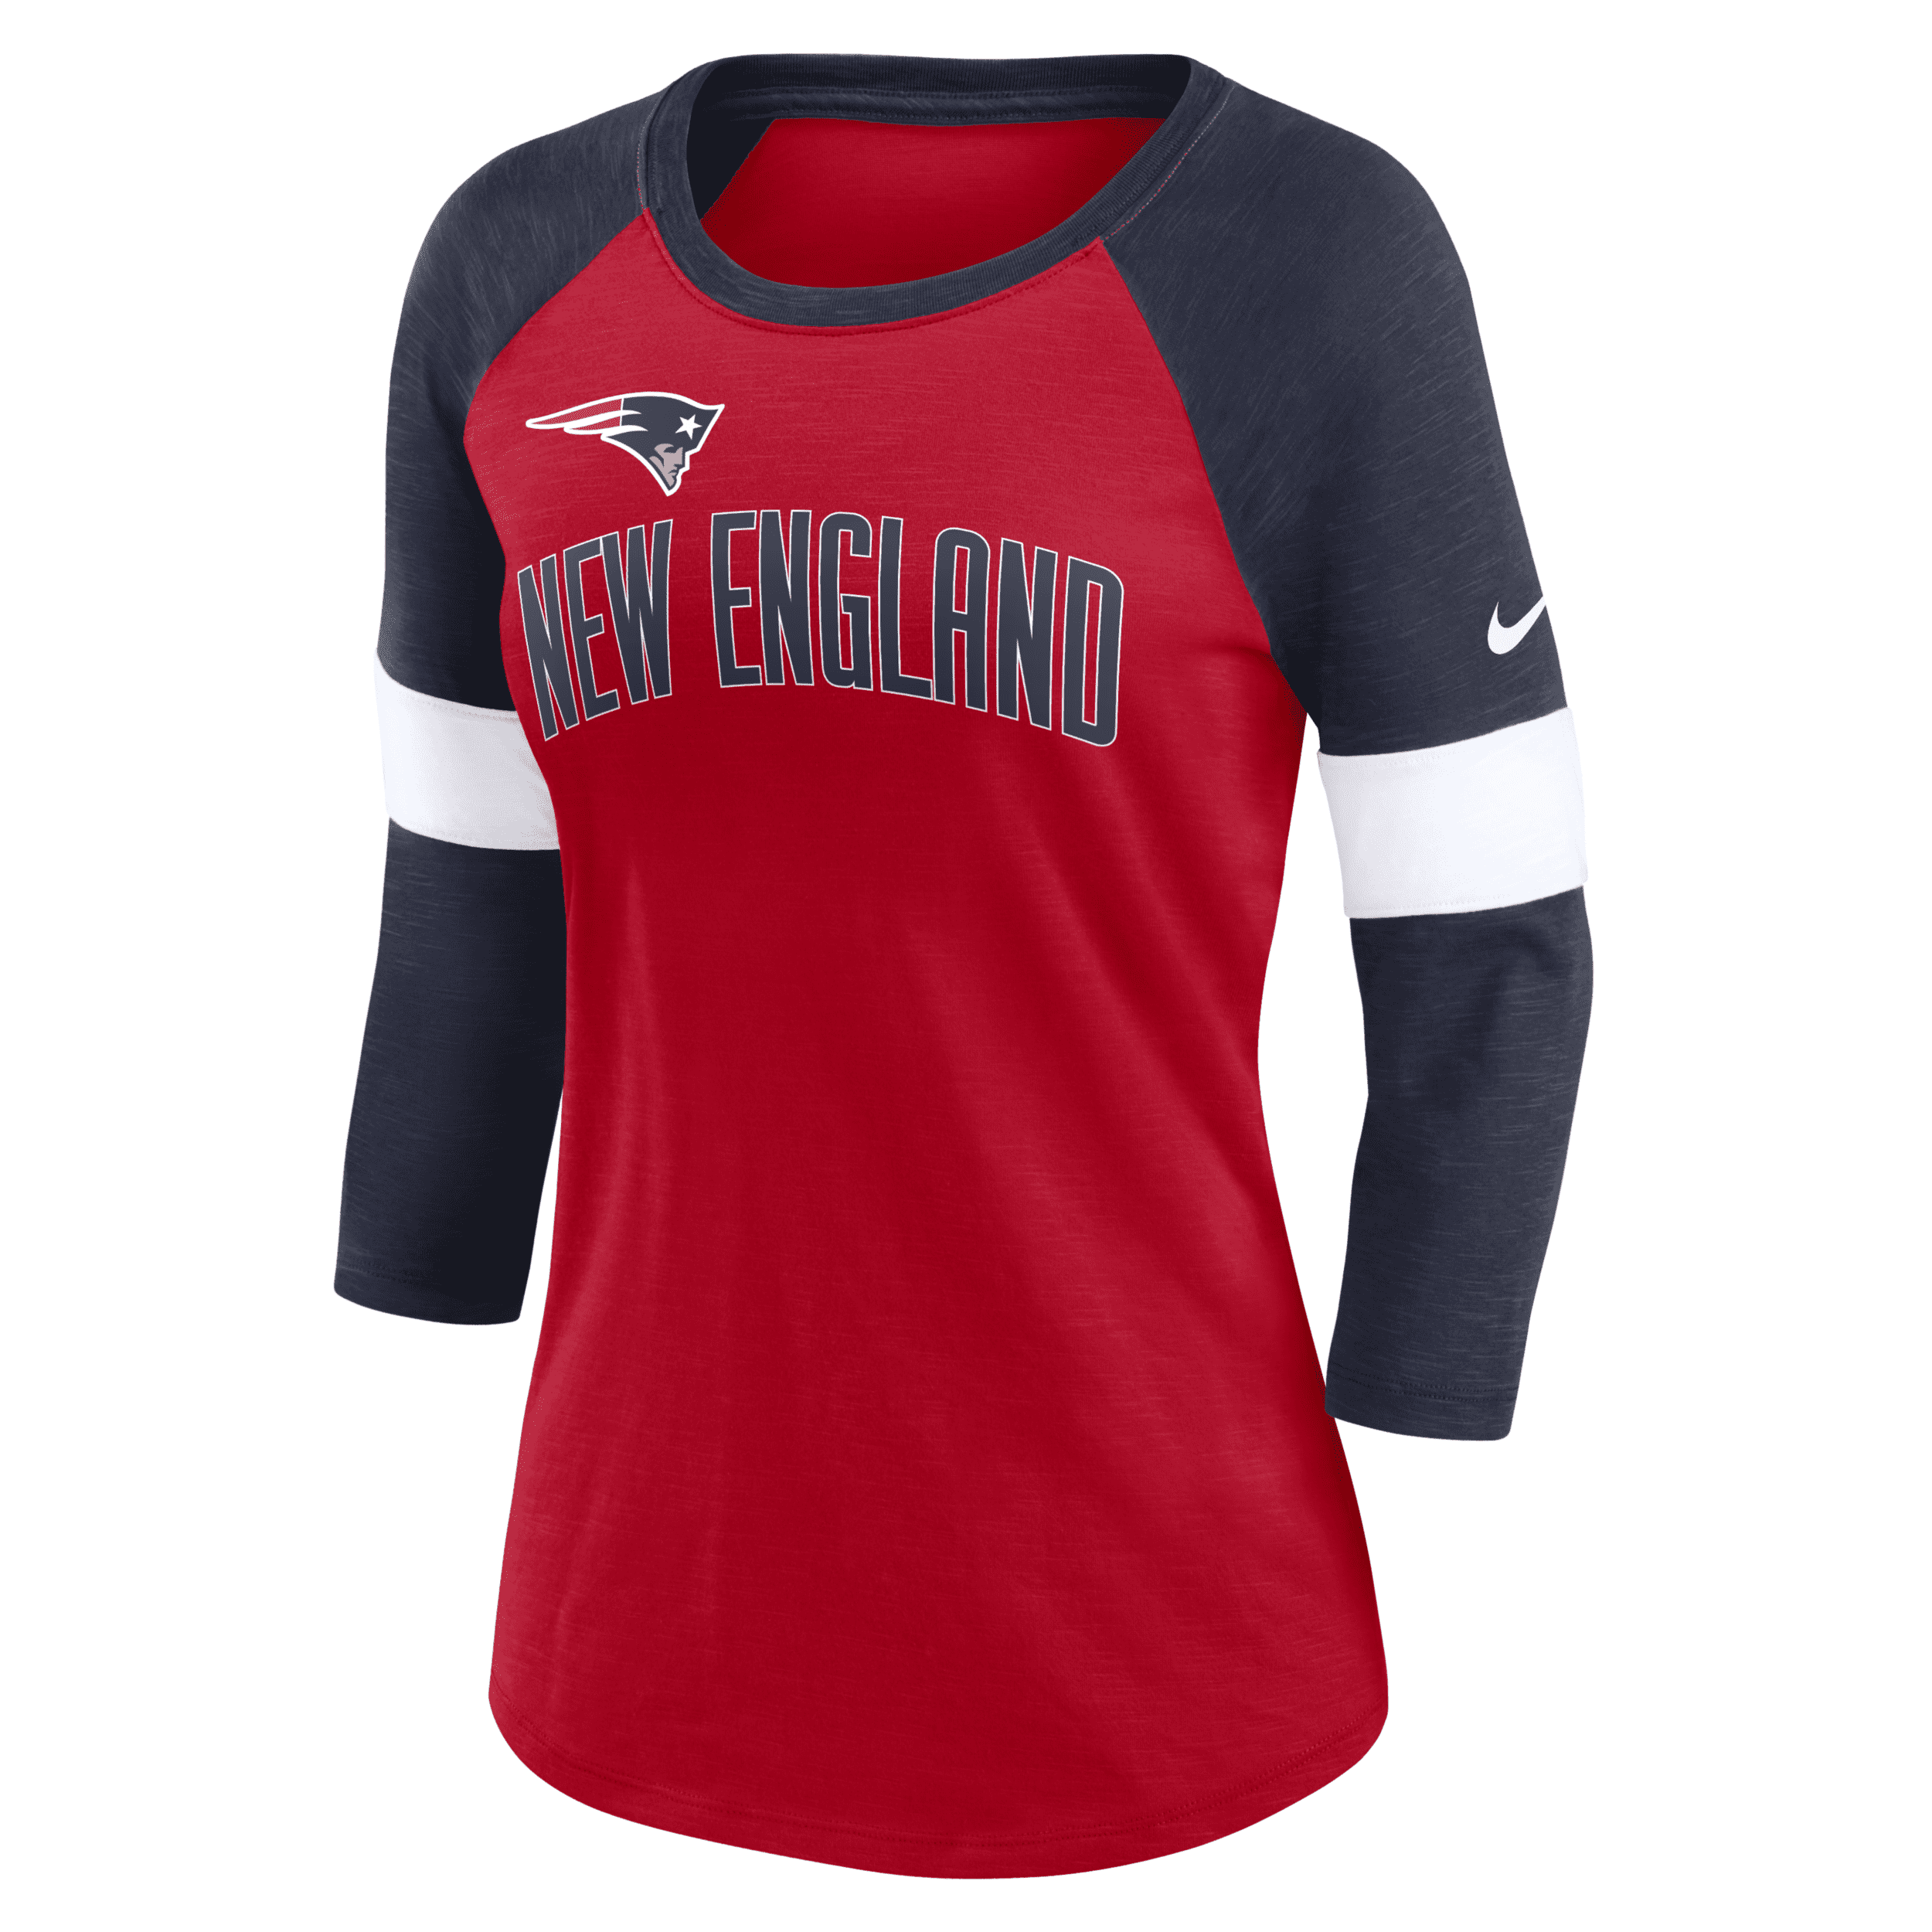 Nike Women's Pride (nfl New England Patriots) 3/4-sleeve T-shirt In Red